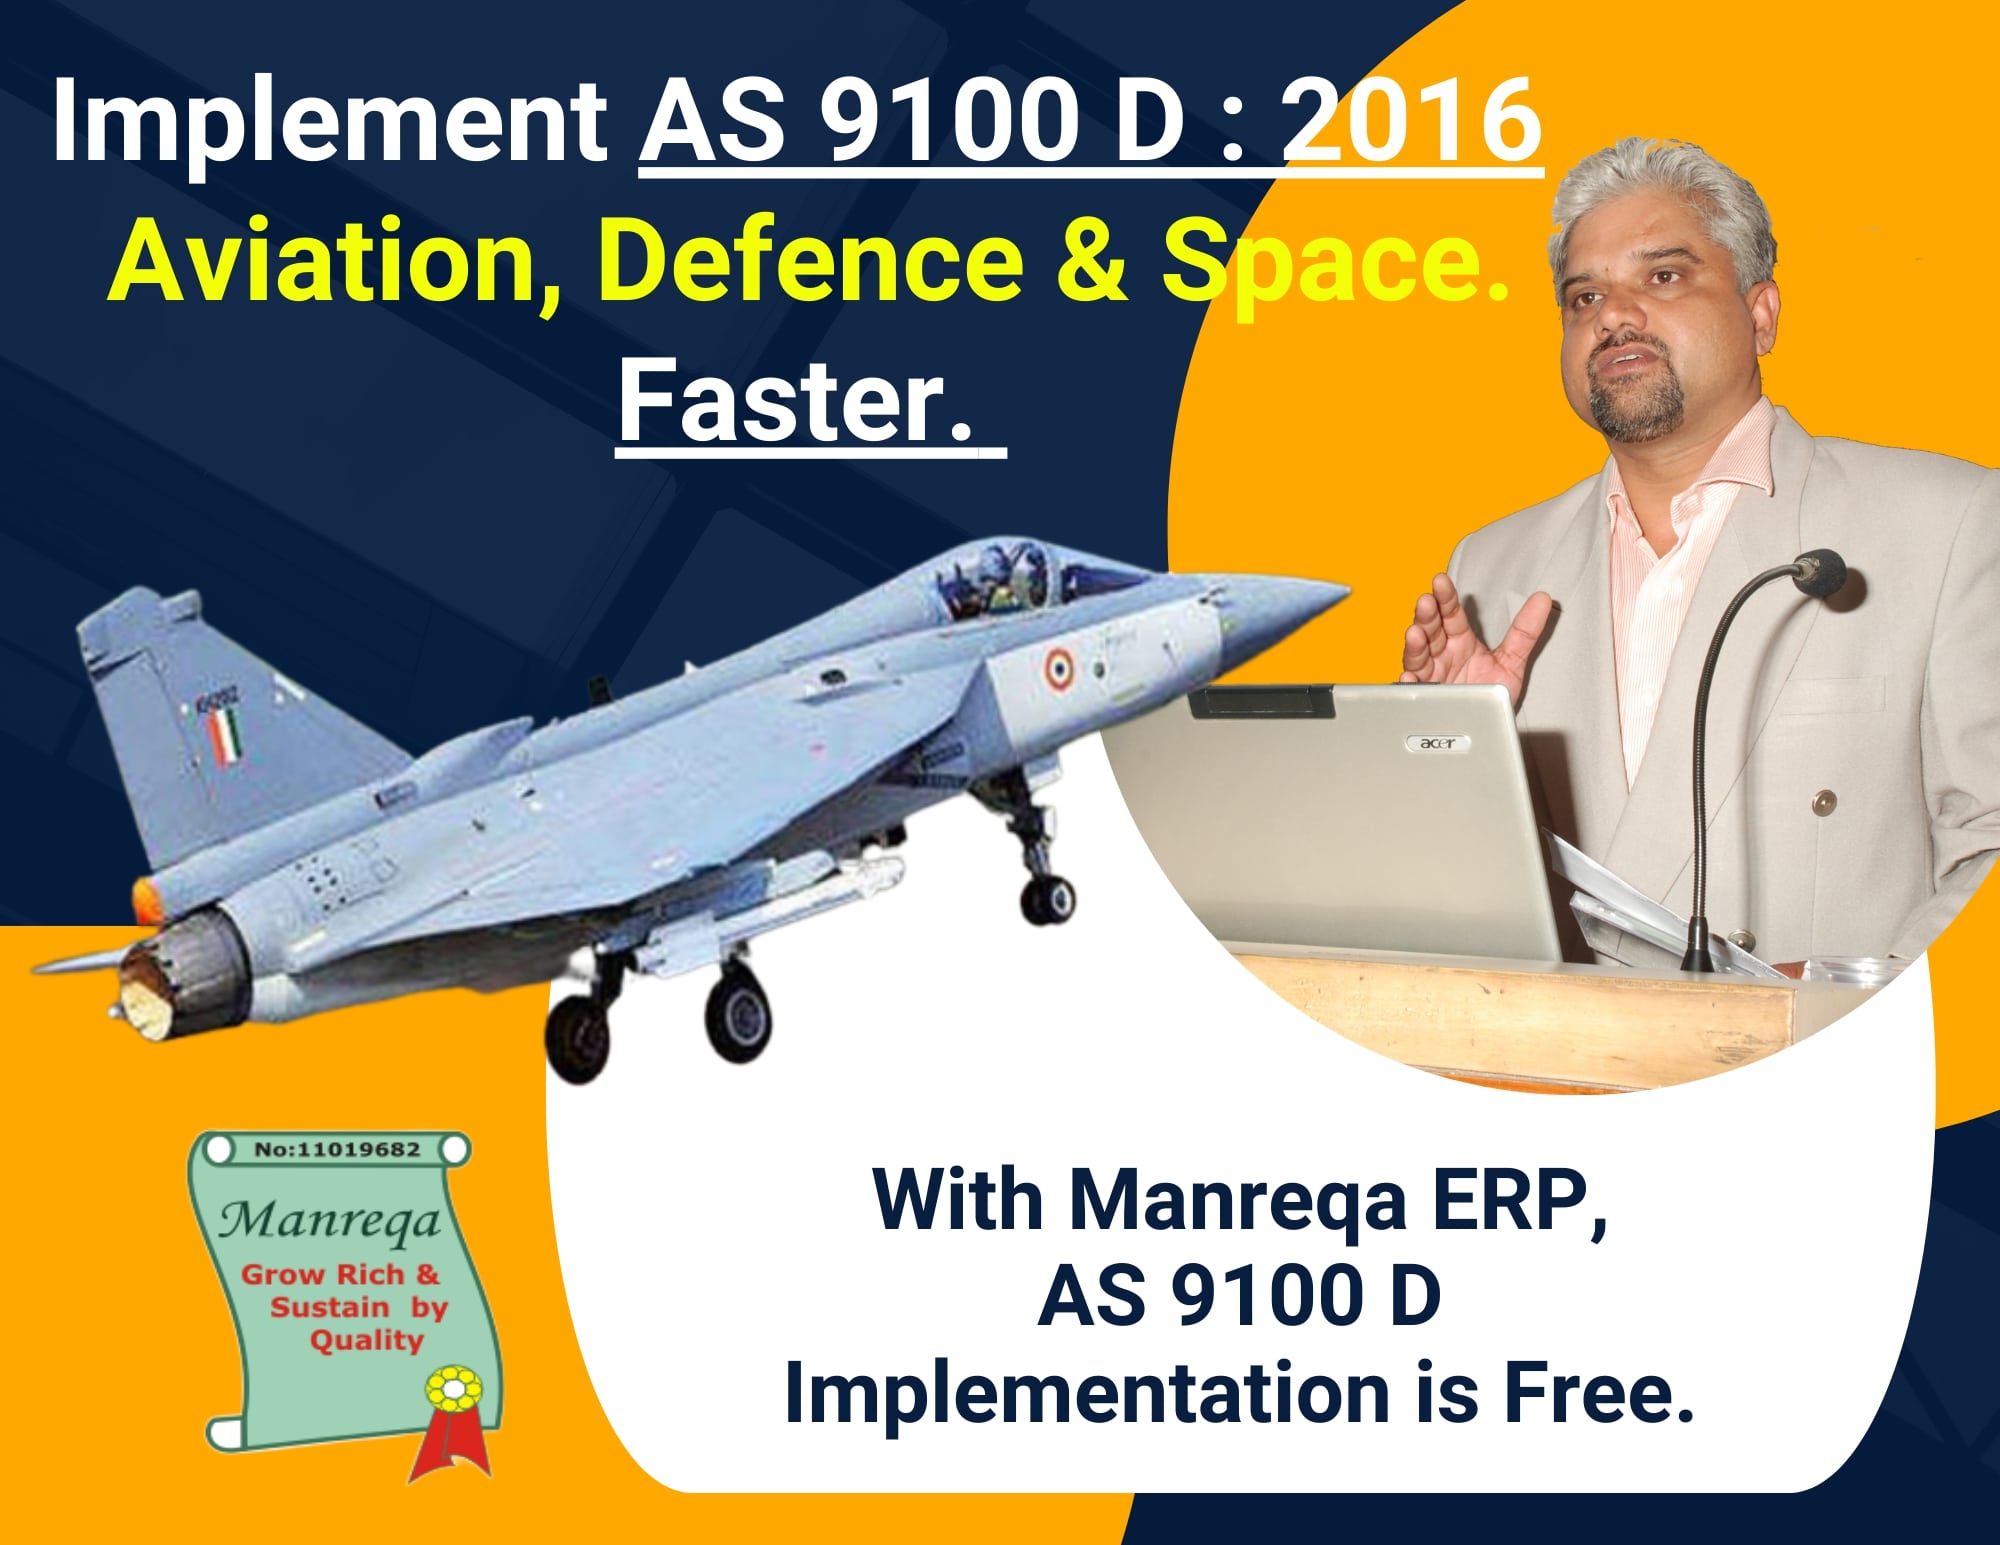 Implement AS 9100 D: 2016 Aviation, Defence & Space. Faster.
With Manreqa ERP, AS 9100 D Implementation is Free.